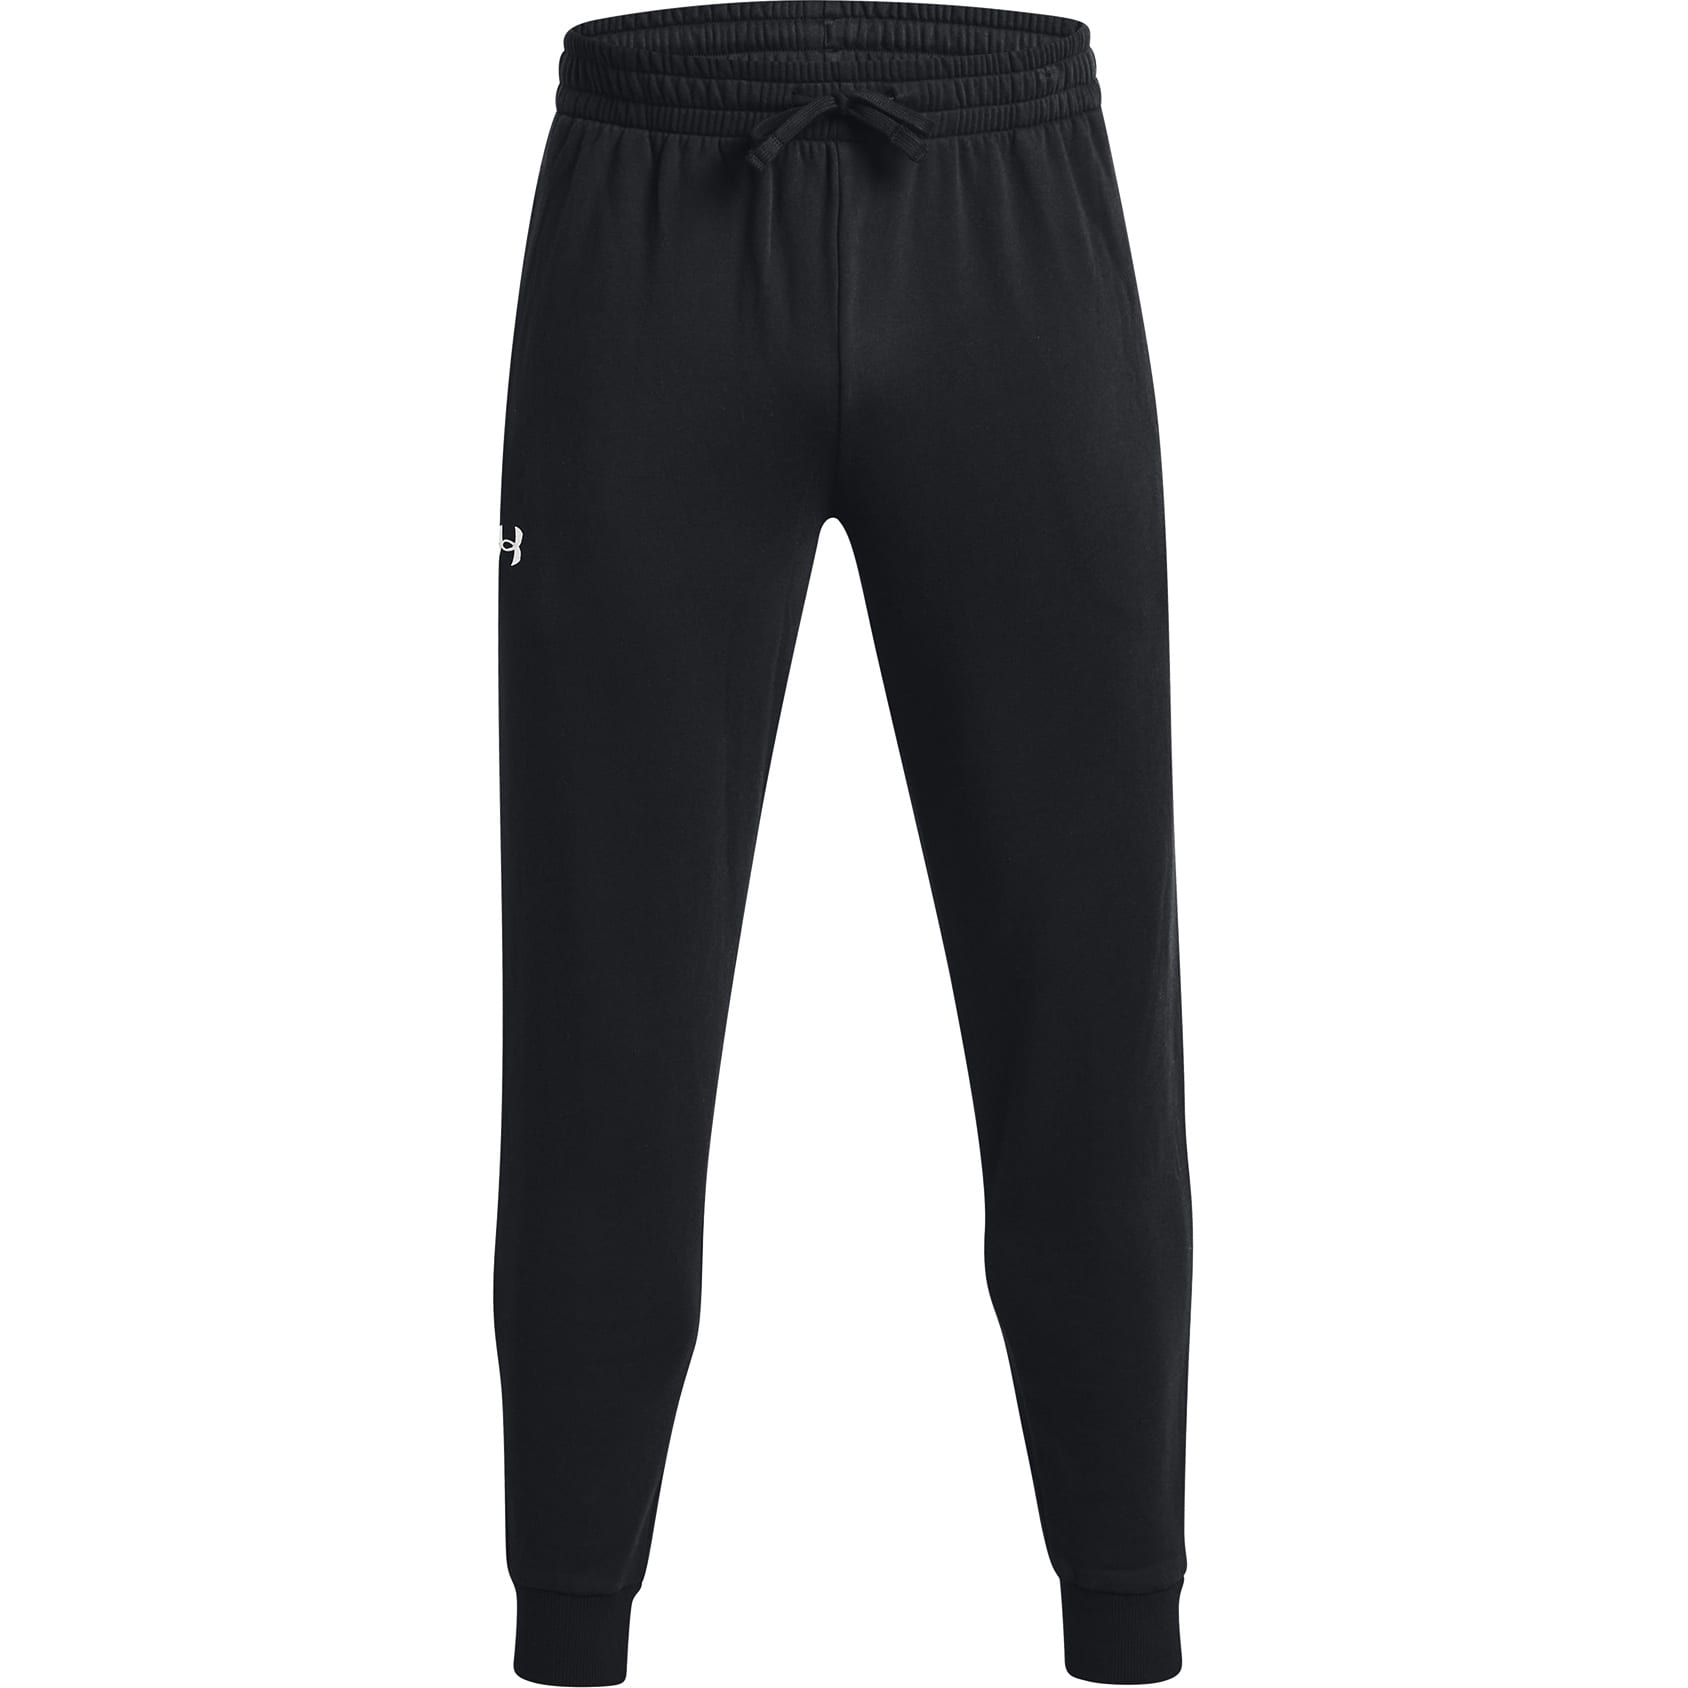 Under armour, Jogging bottoms, Womens sports clothing